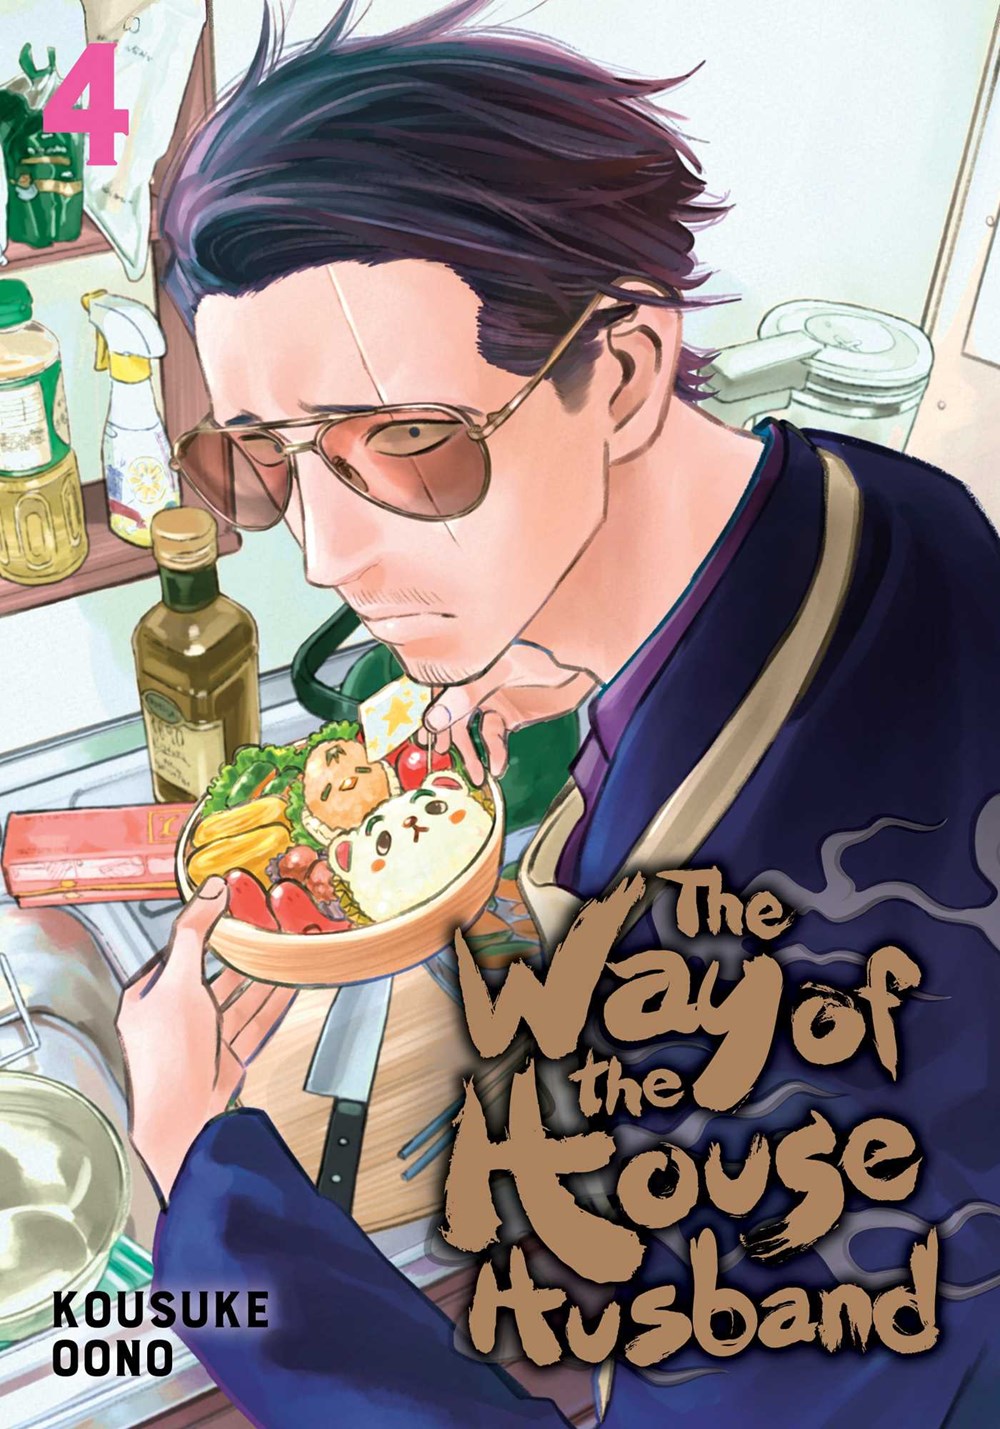 The Way of the Househusband  Vol. 4